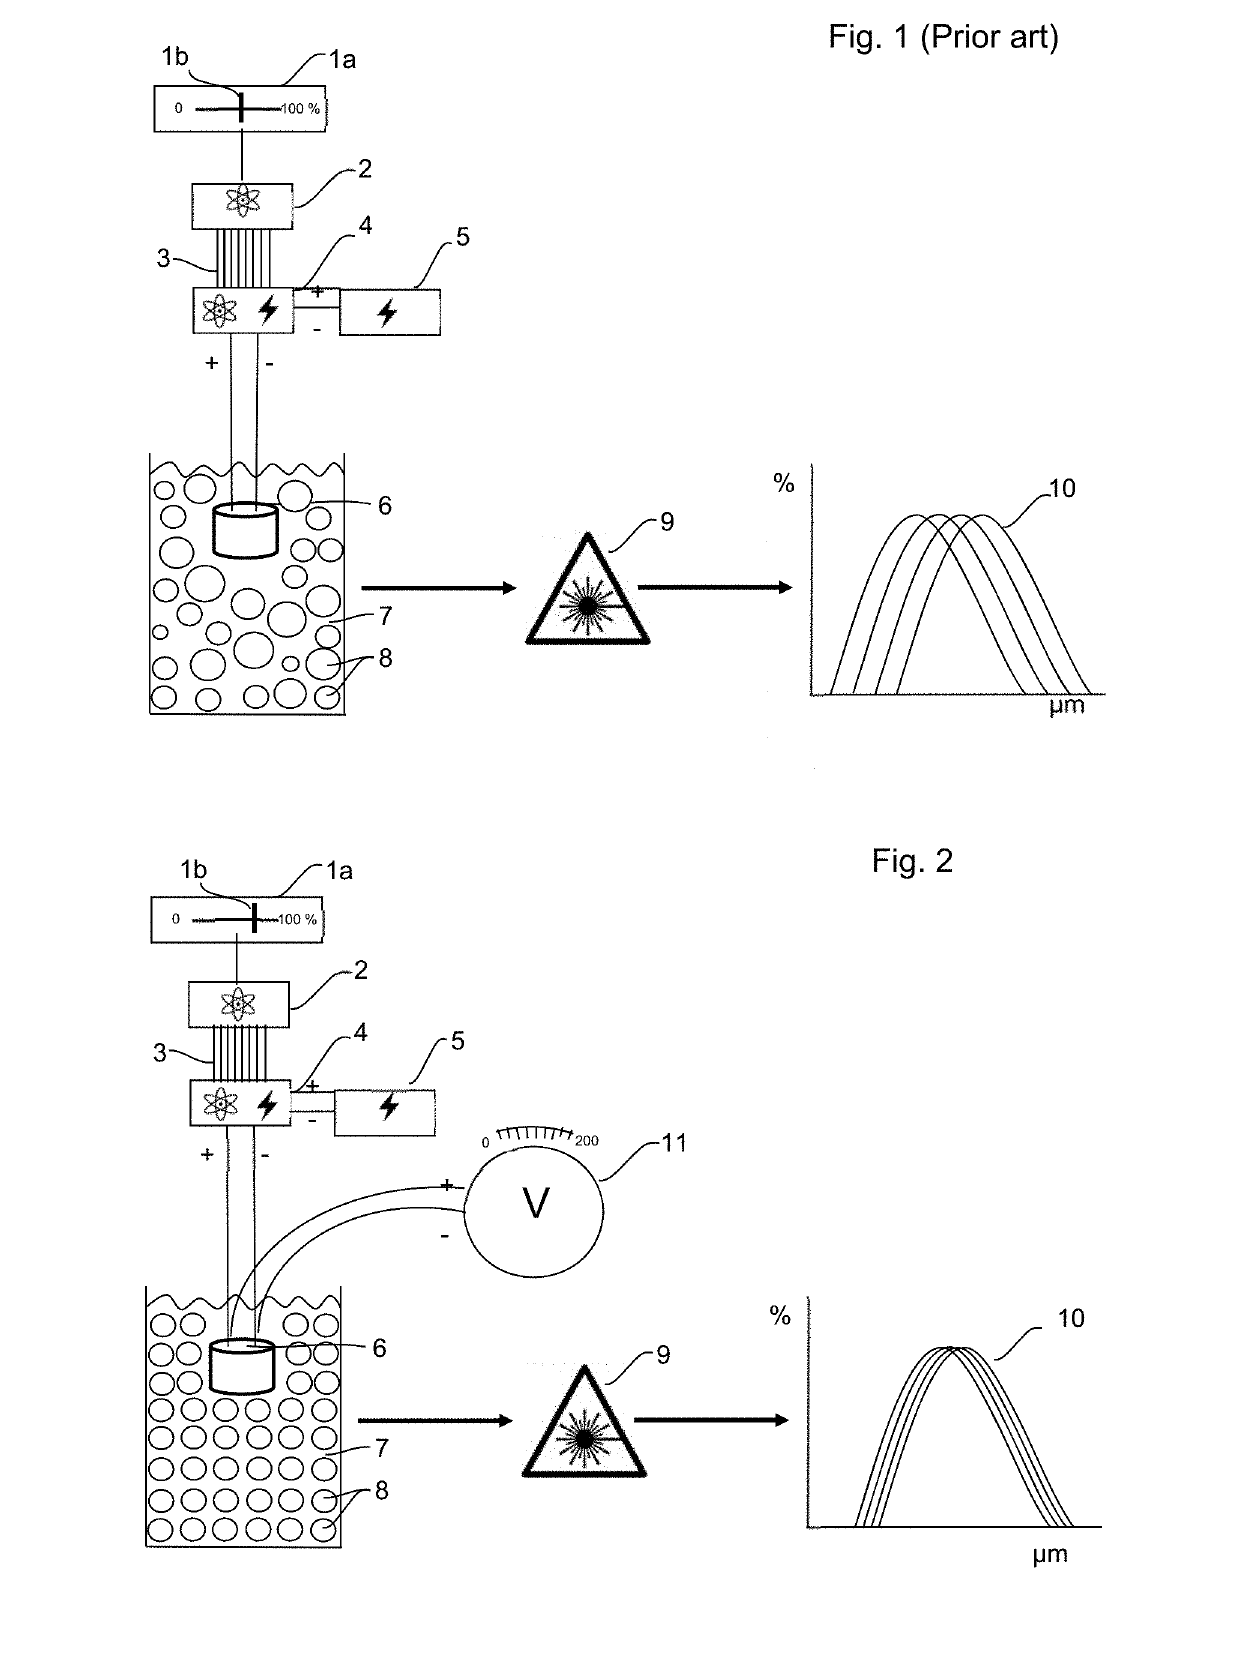 Method and apparatus to improve analytical method development and sample preparation for reproducible particle size measurement